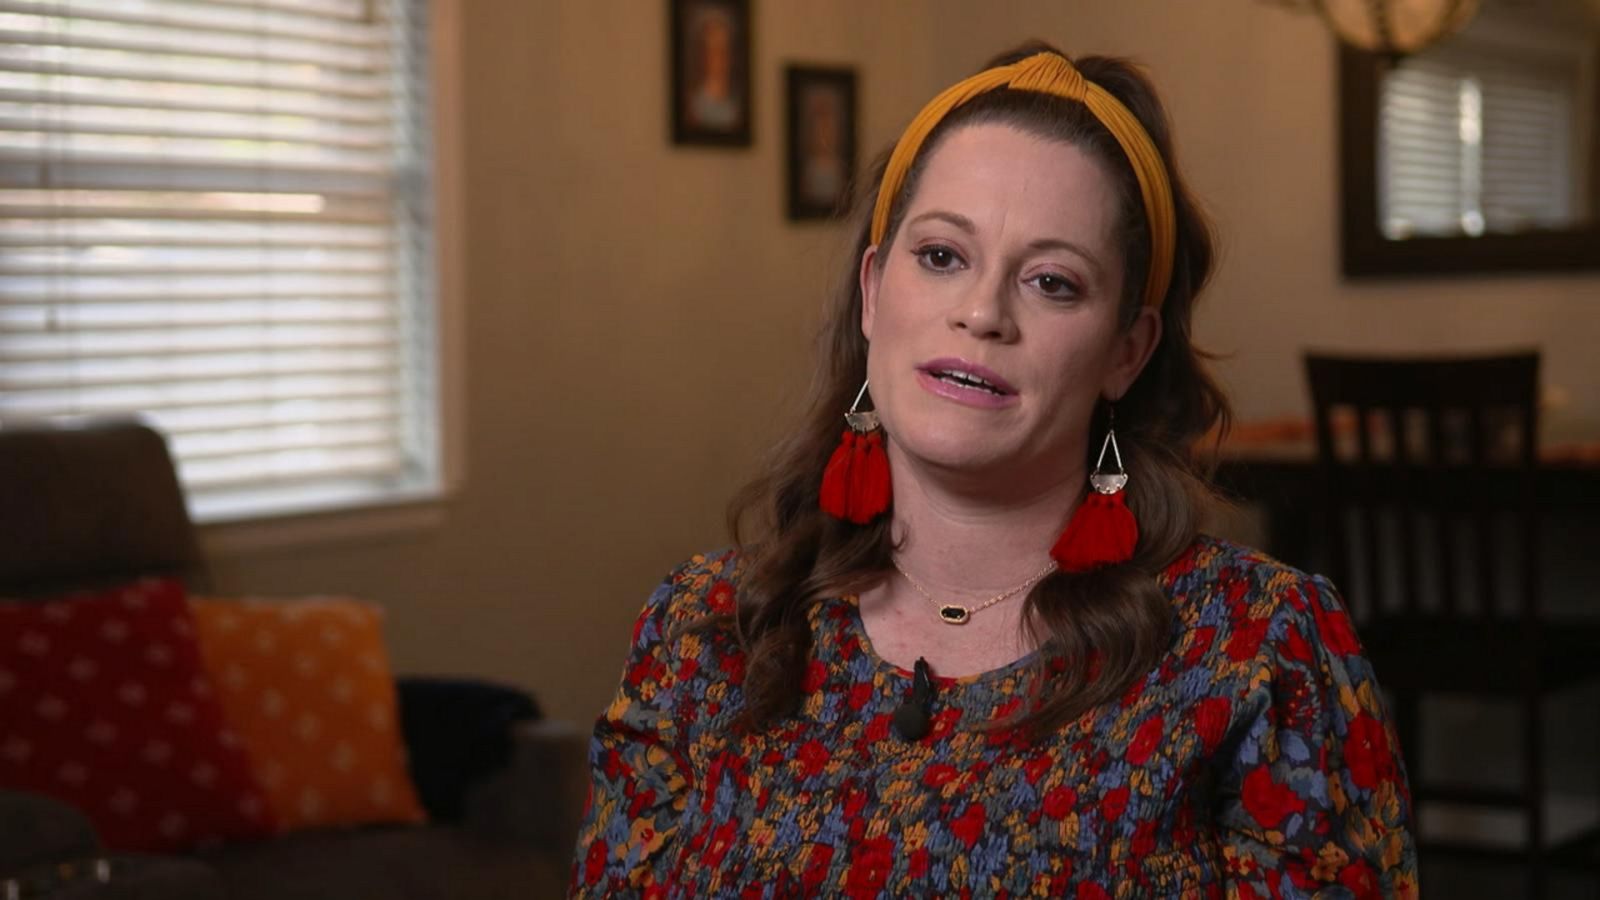 VIDEO: Woman with PCOS shares struggles with infertility